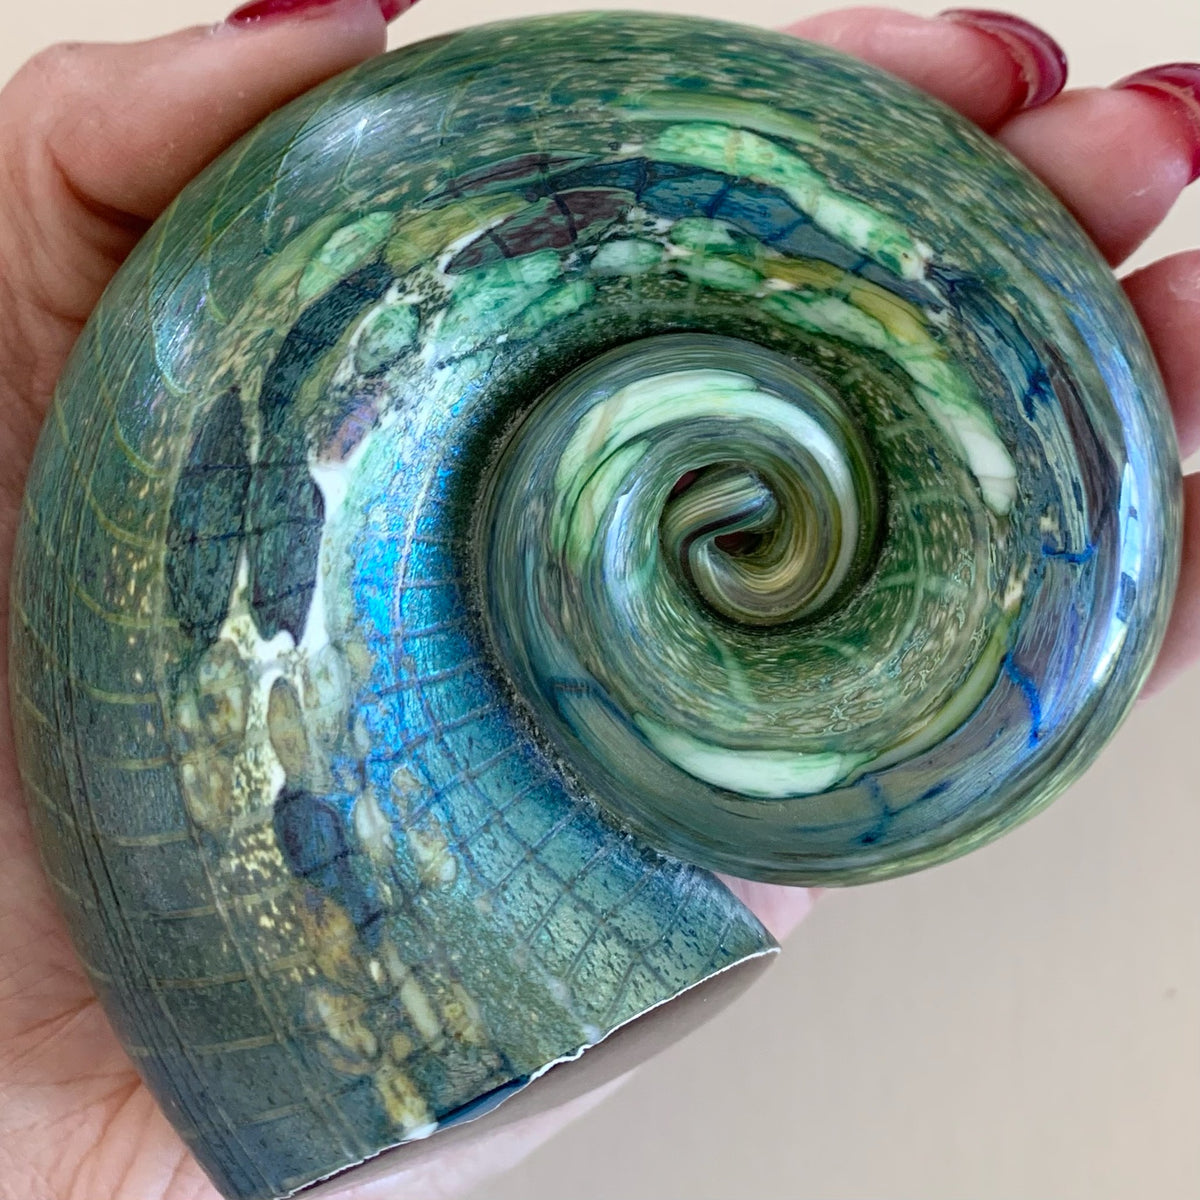 Iridescent glass shell - Blue and green tones